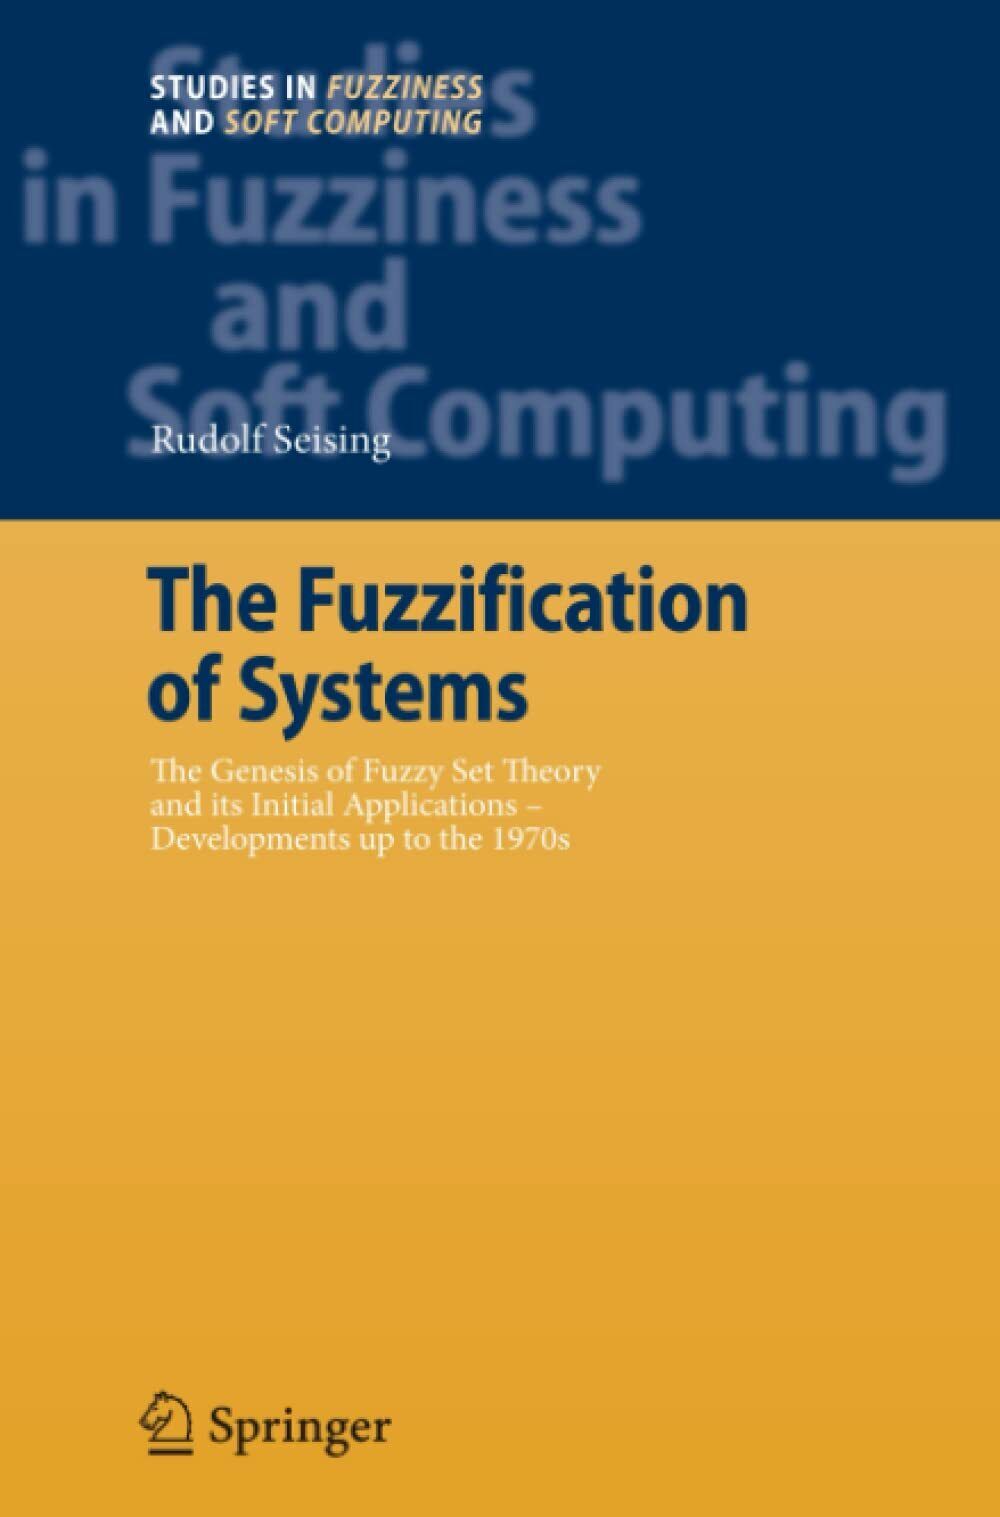 The Fuzzification of Systems - Rudolf Seising - Springer, 2010